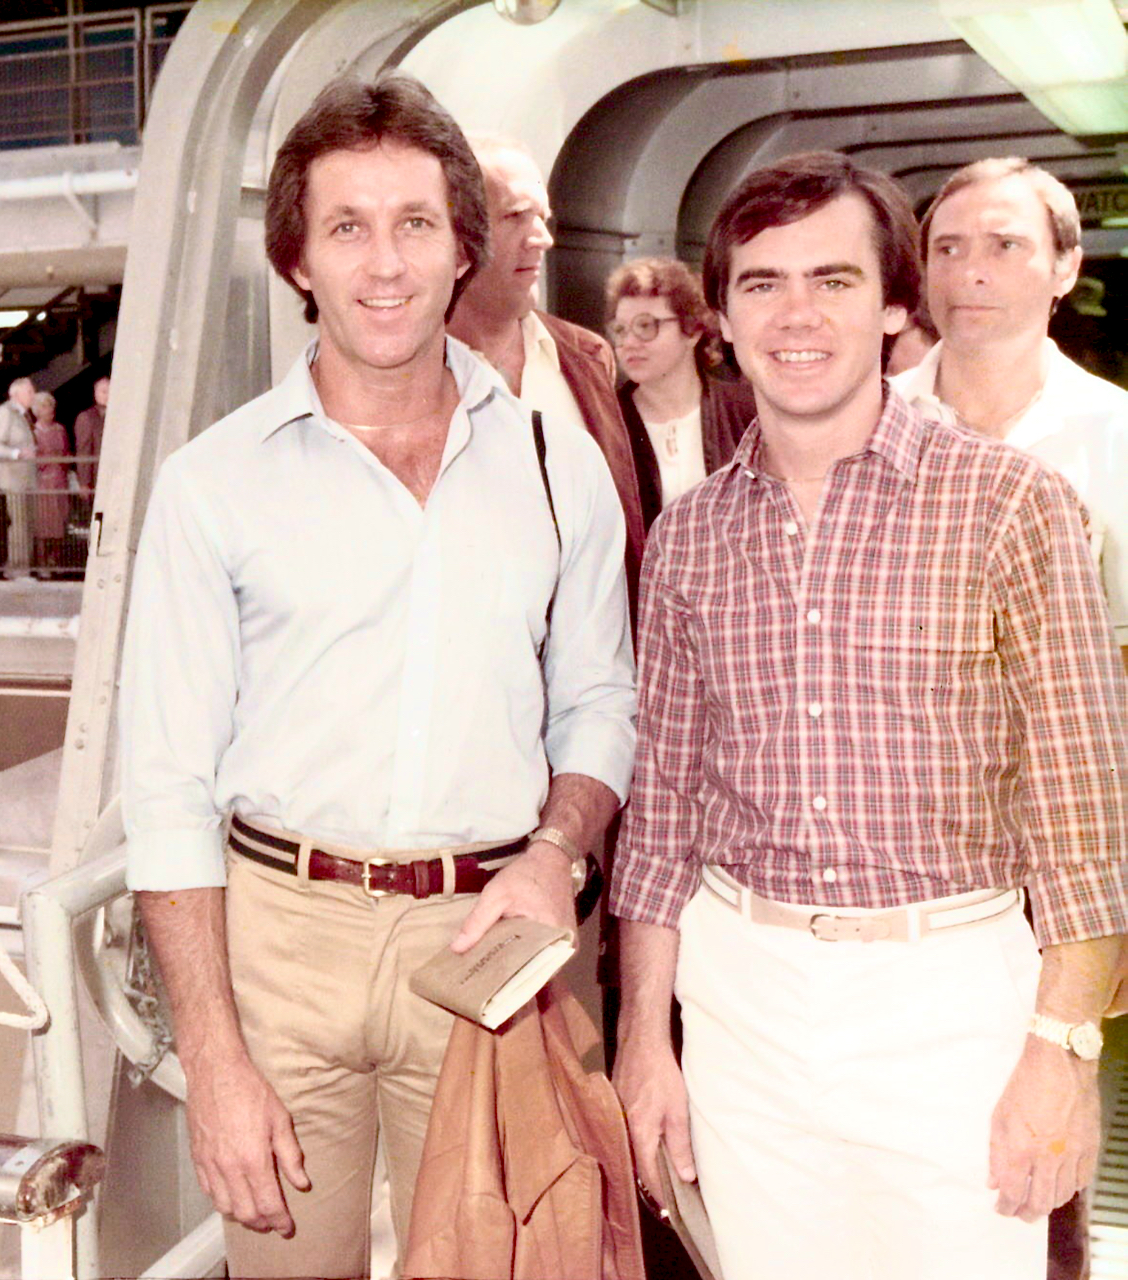 John and Jim on their first cruise, 1980.